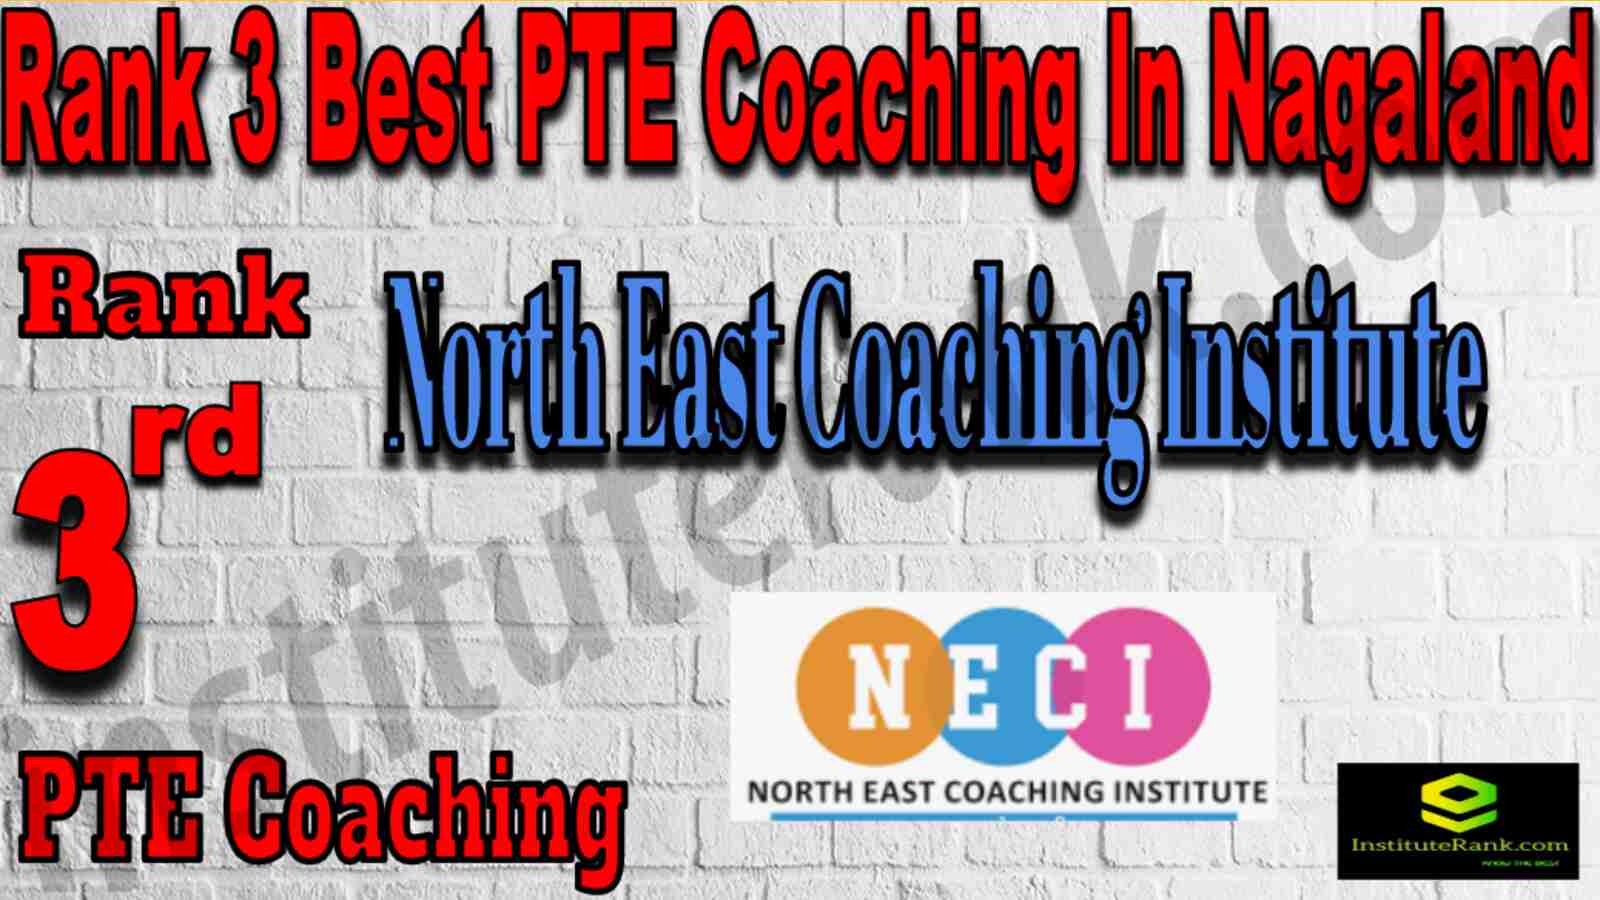 Rank 3 Best PTE Coaching In Nagaland